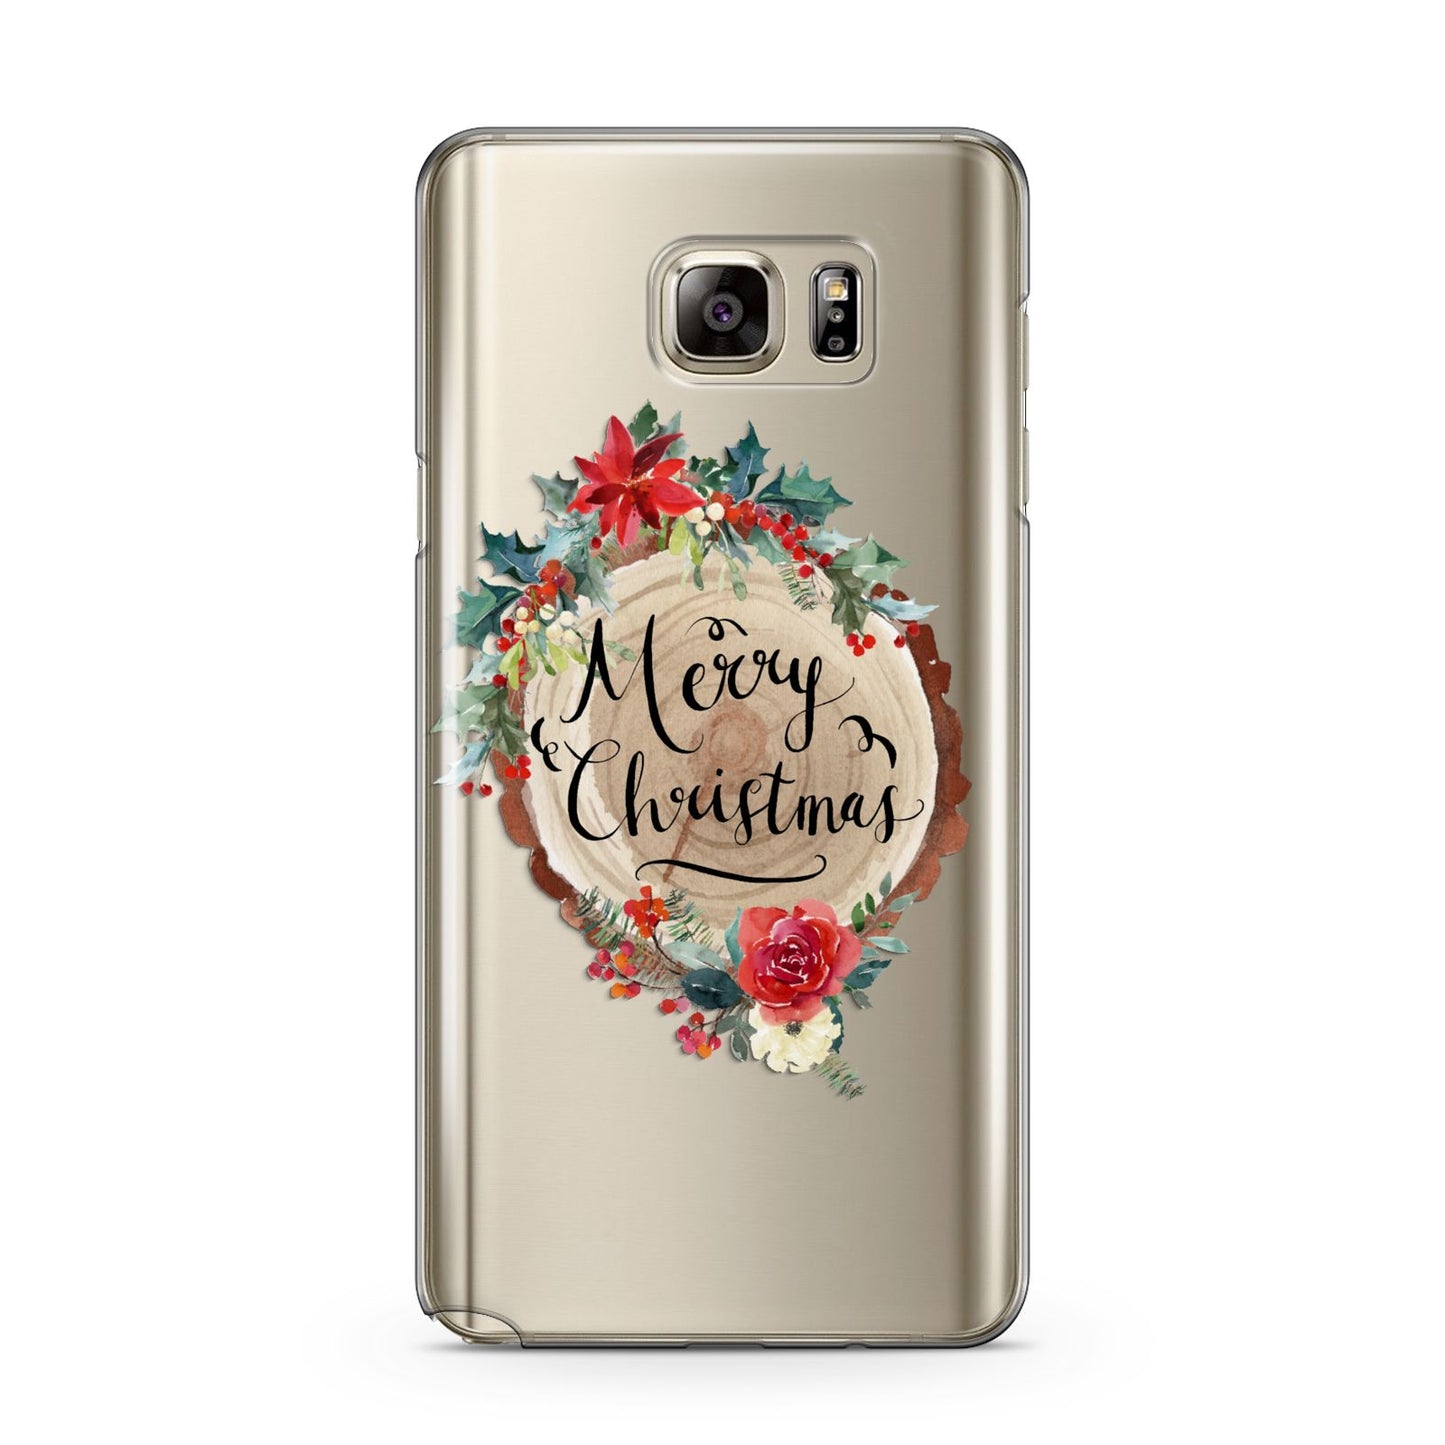 Merry Christmas Log Floral Samsung Galaxy Note 5 Case